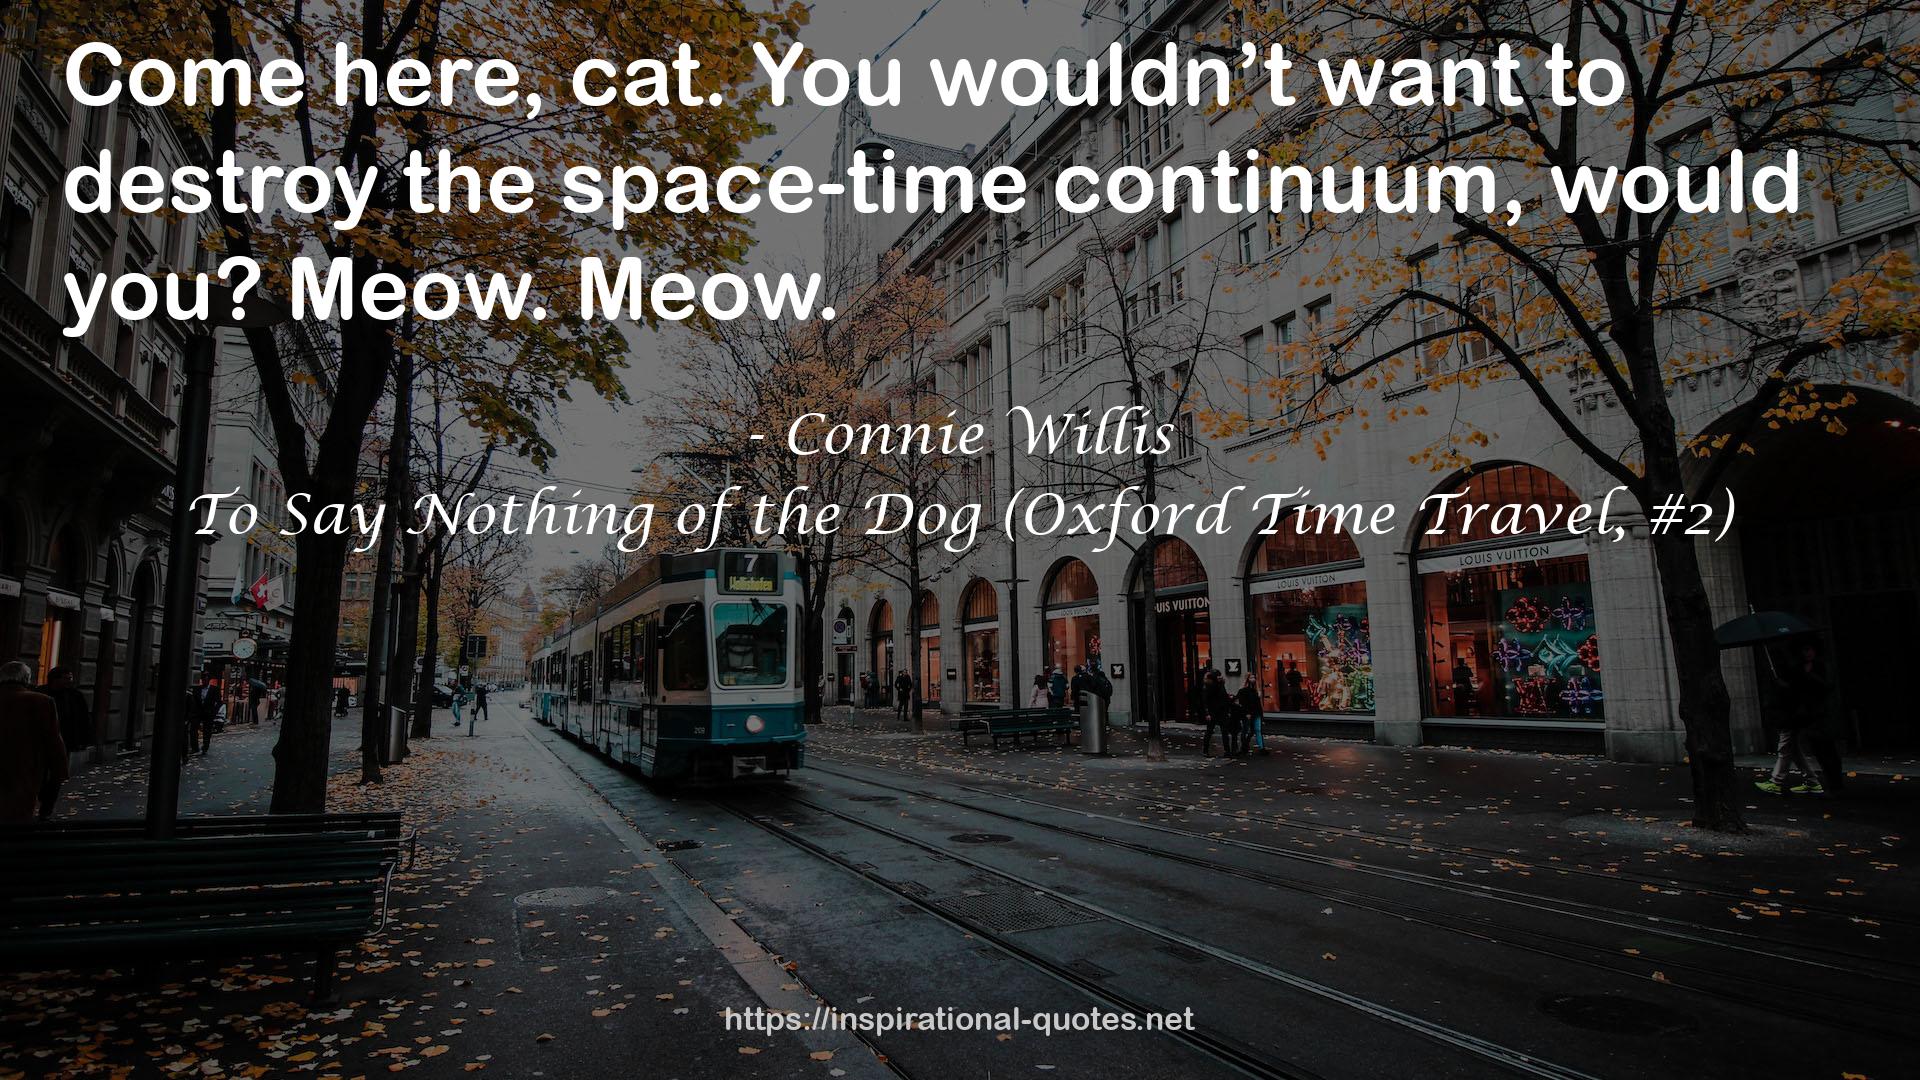 To Say Nothing of the Dog (Oxford Time Travel, #2) QUOTES